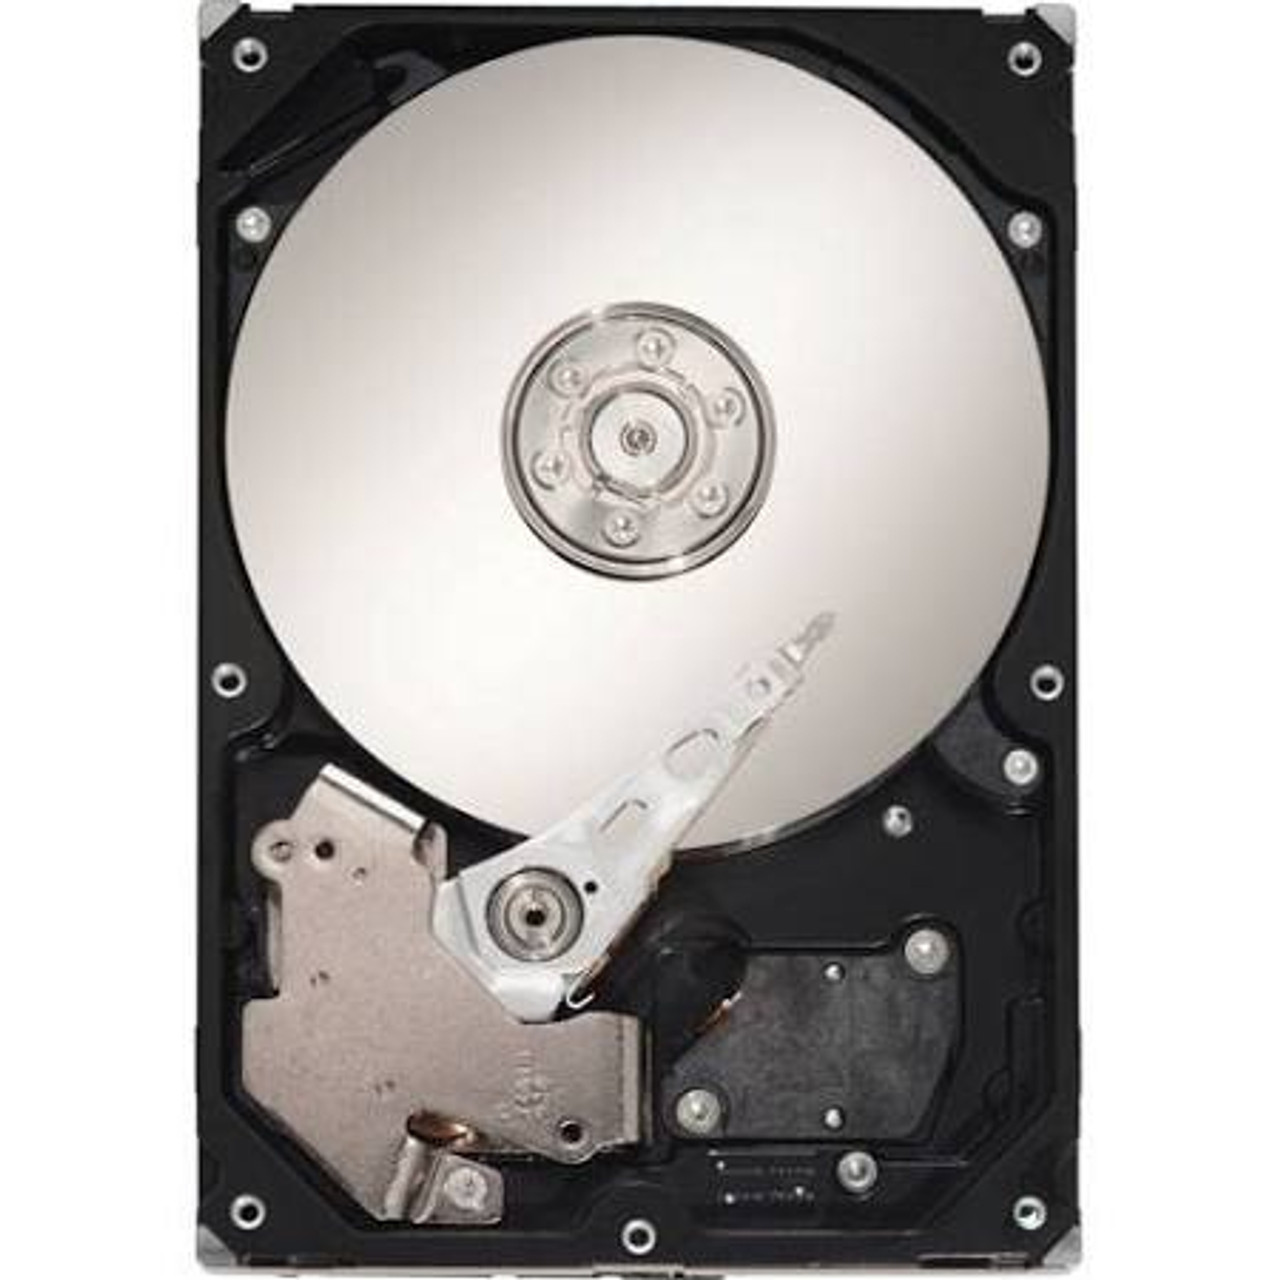 ST318405LC - Seagate Cheetah 36XL ST318405LC 18.40 GB 3.5 Hard Drive - Ultra160 SCSI - 10000 rpm - 4 MB Buffer - Hot Swappable